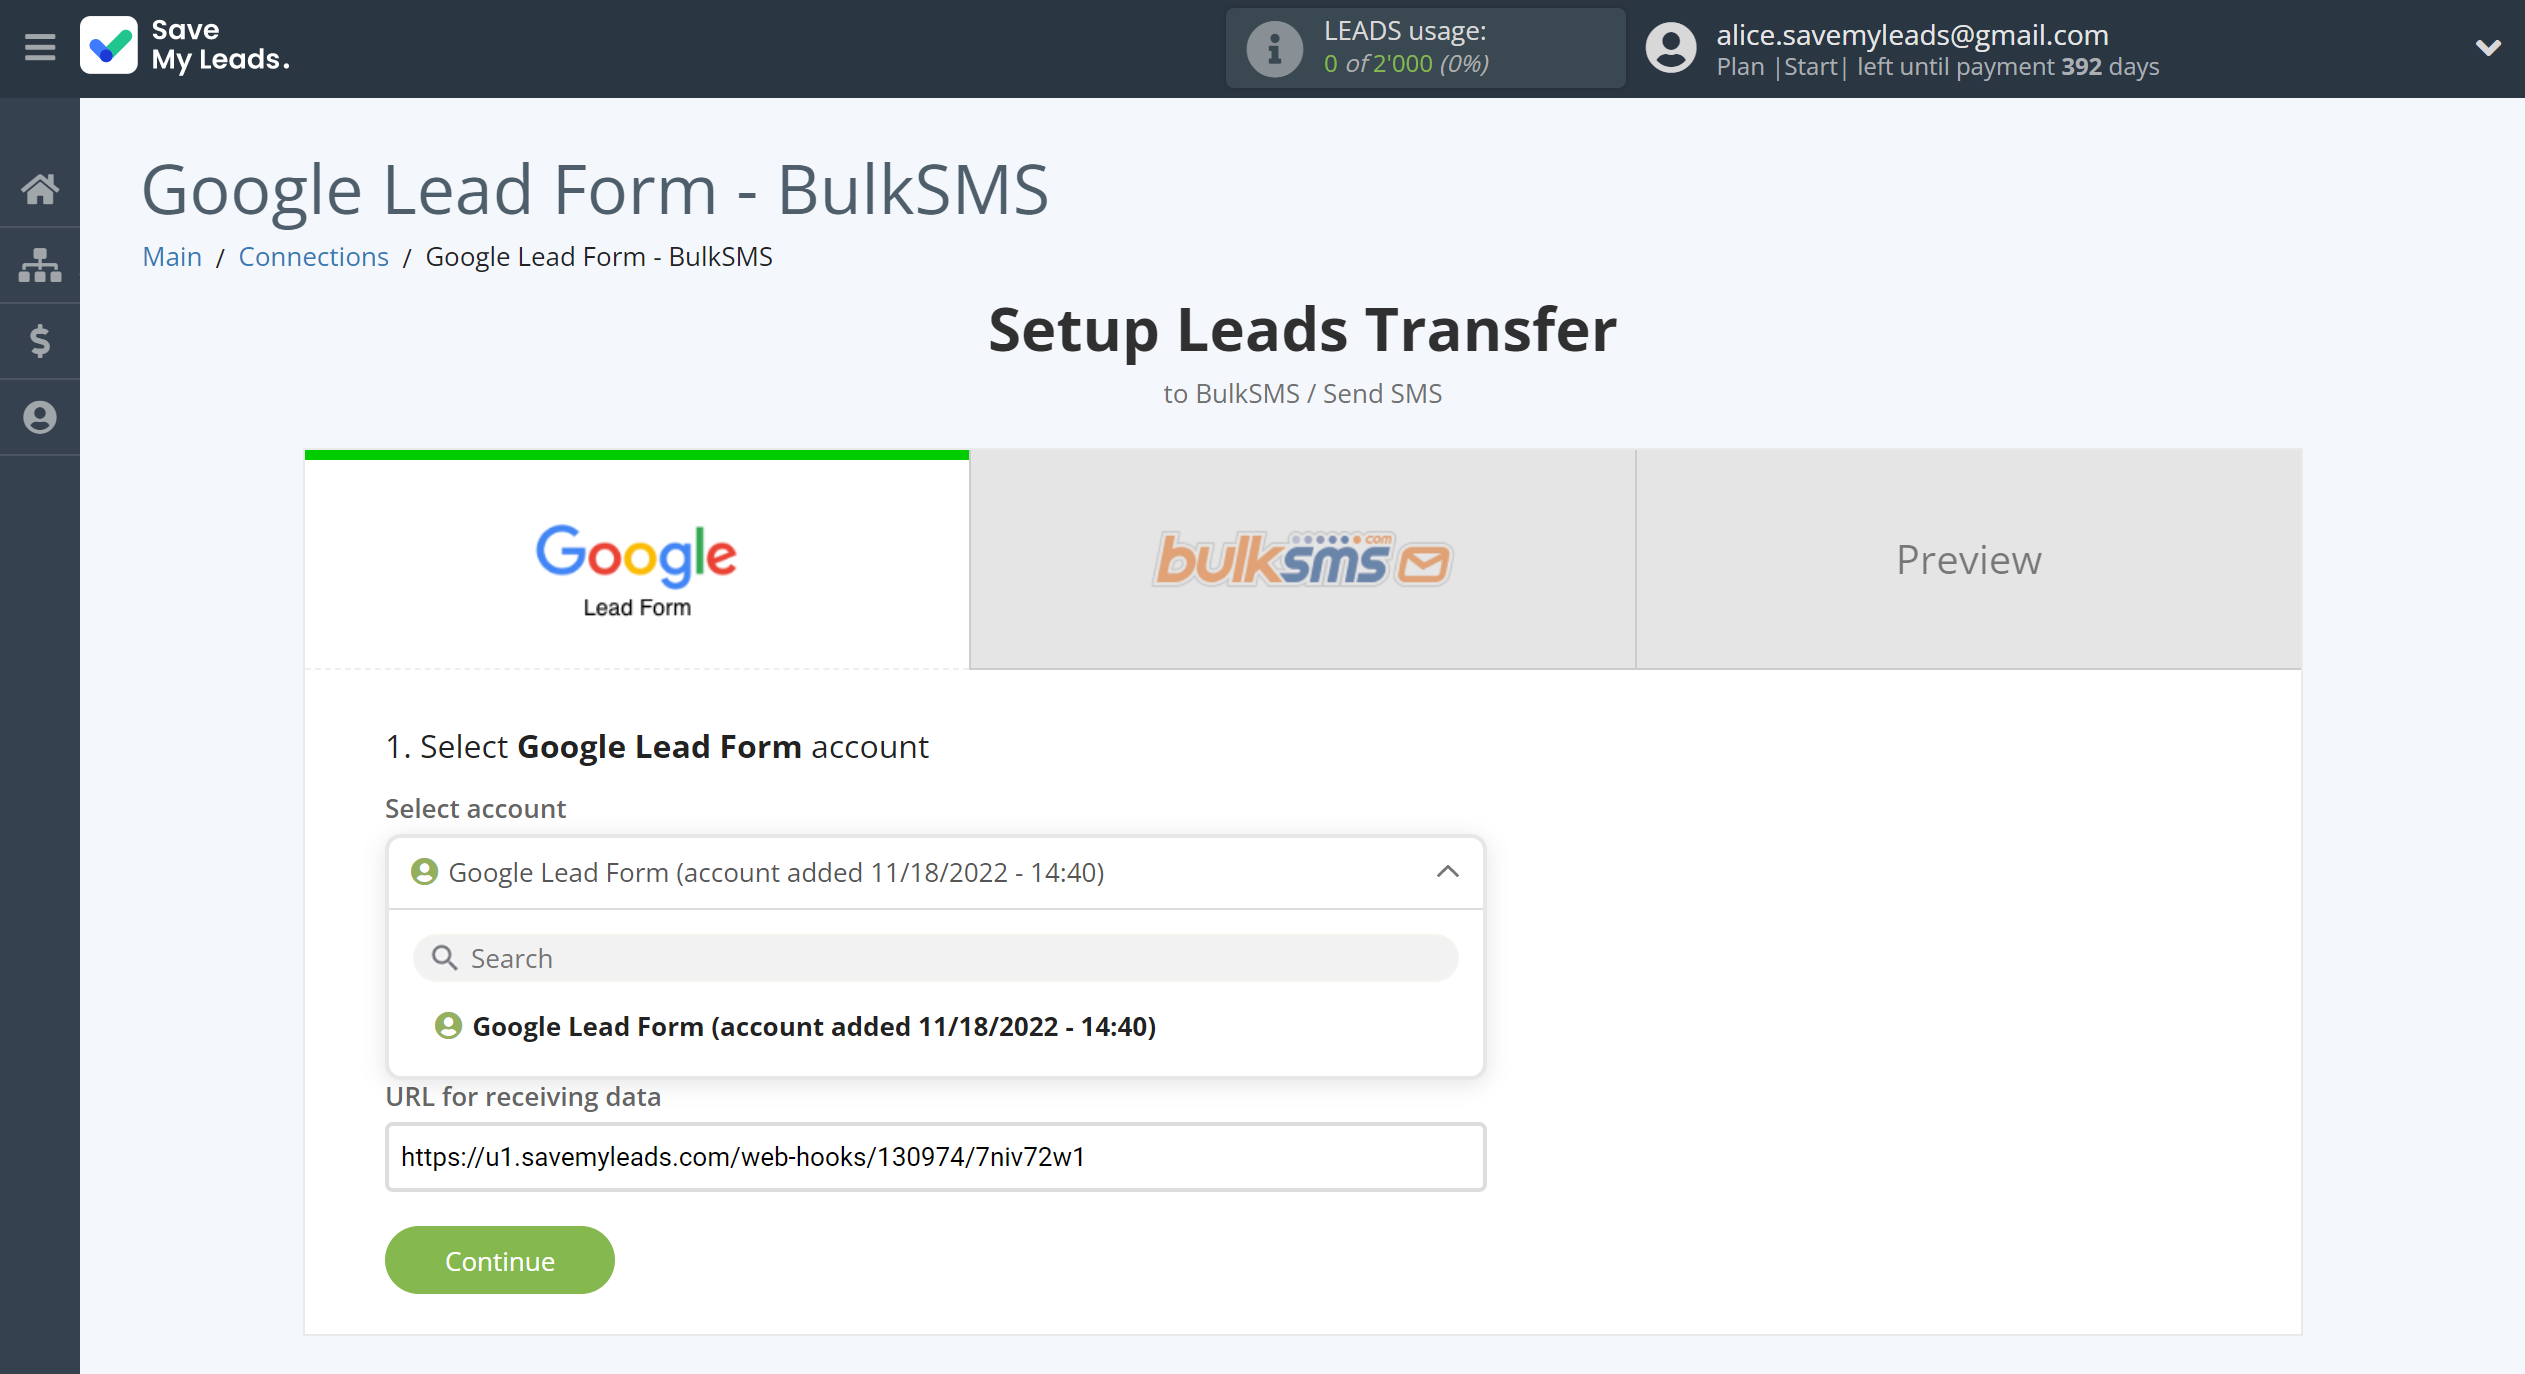 How to Connect Google Lead Form with BulkSMS | Data Source account selection